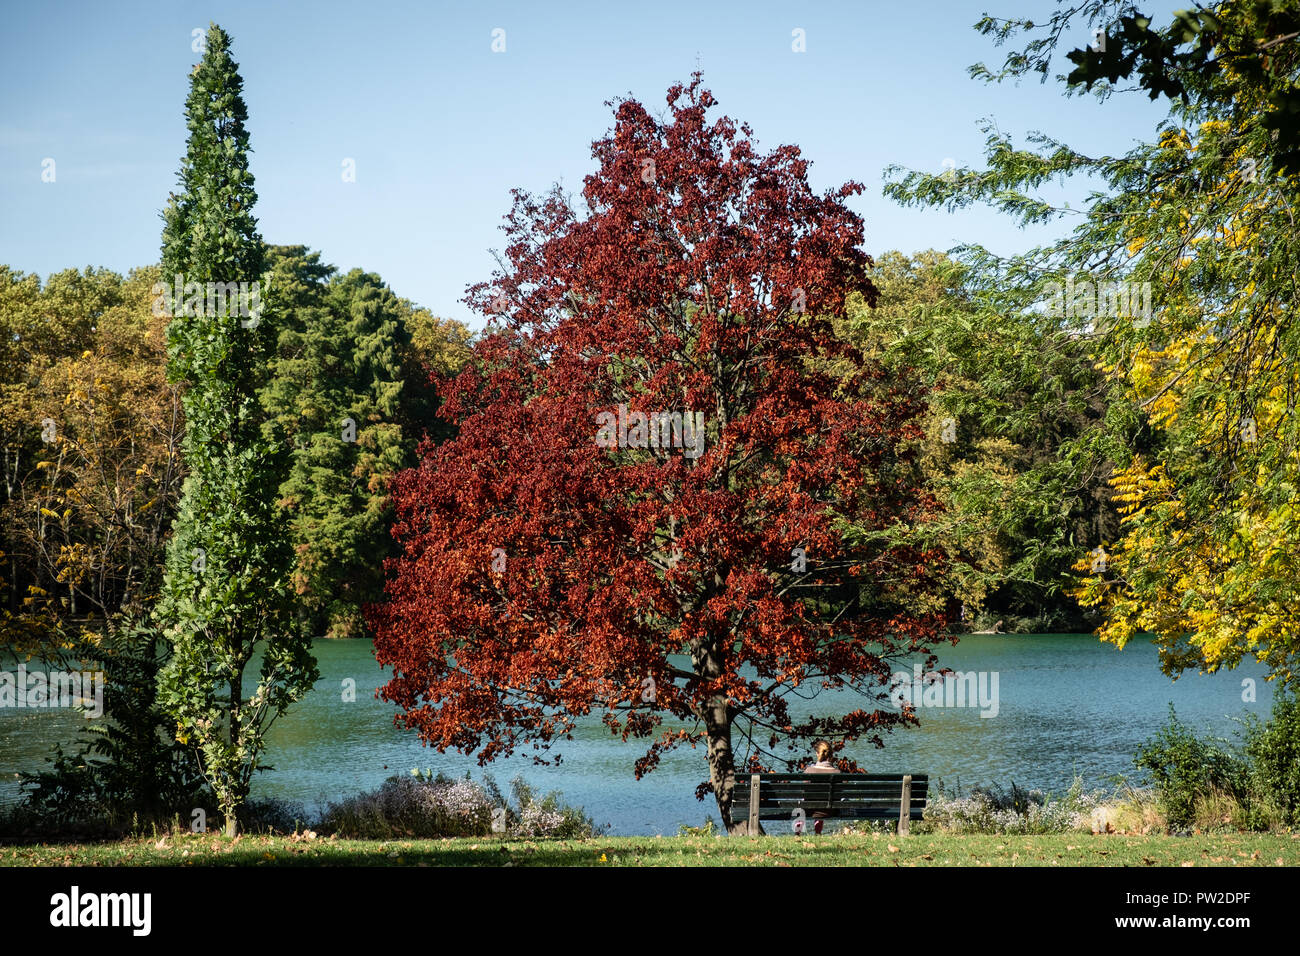 Autumn colors in the Tête d'Or Park. A woman from behind is sitting on a bench facing the lake Stock Photo